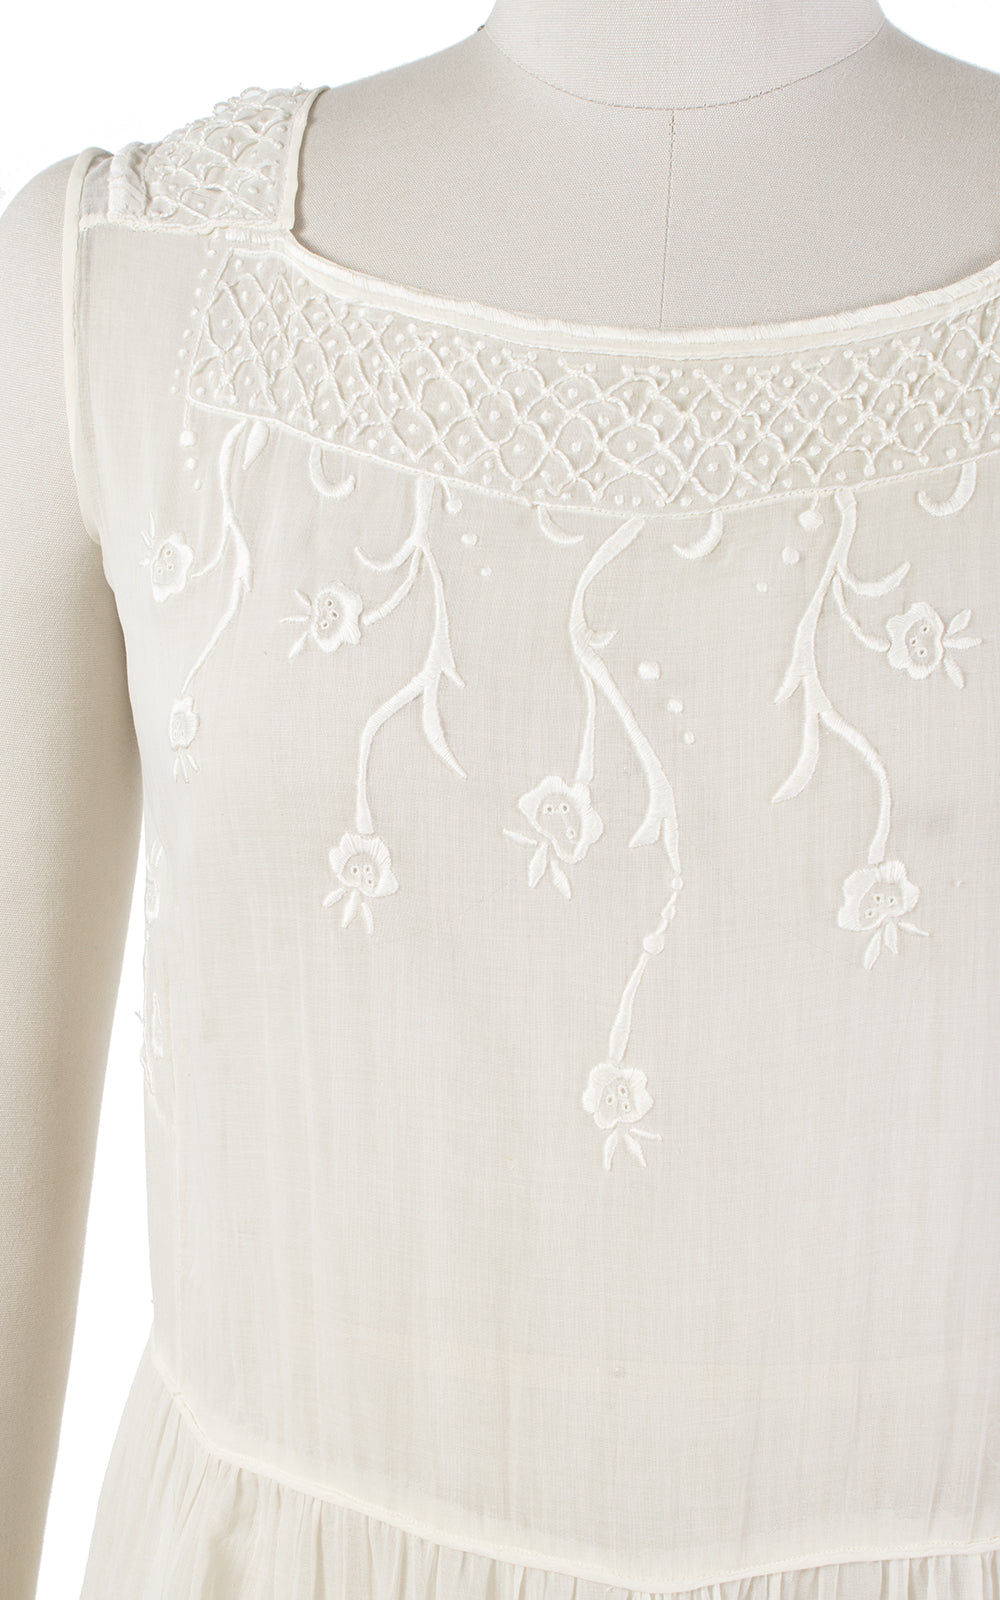 1920s Floral Embroidered Cream Sheer Cotton Voile Sundress